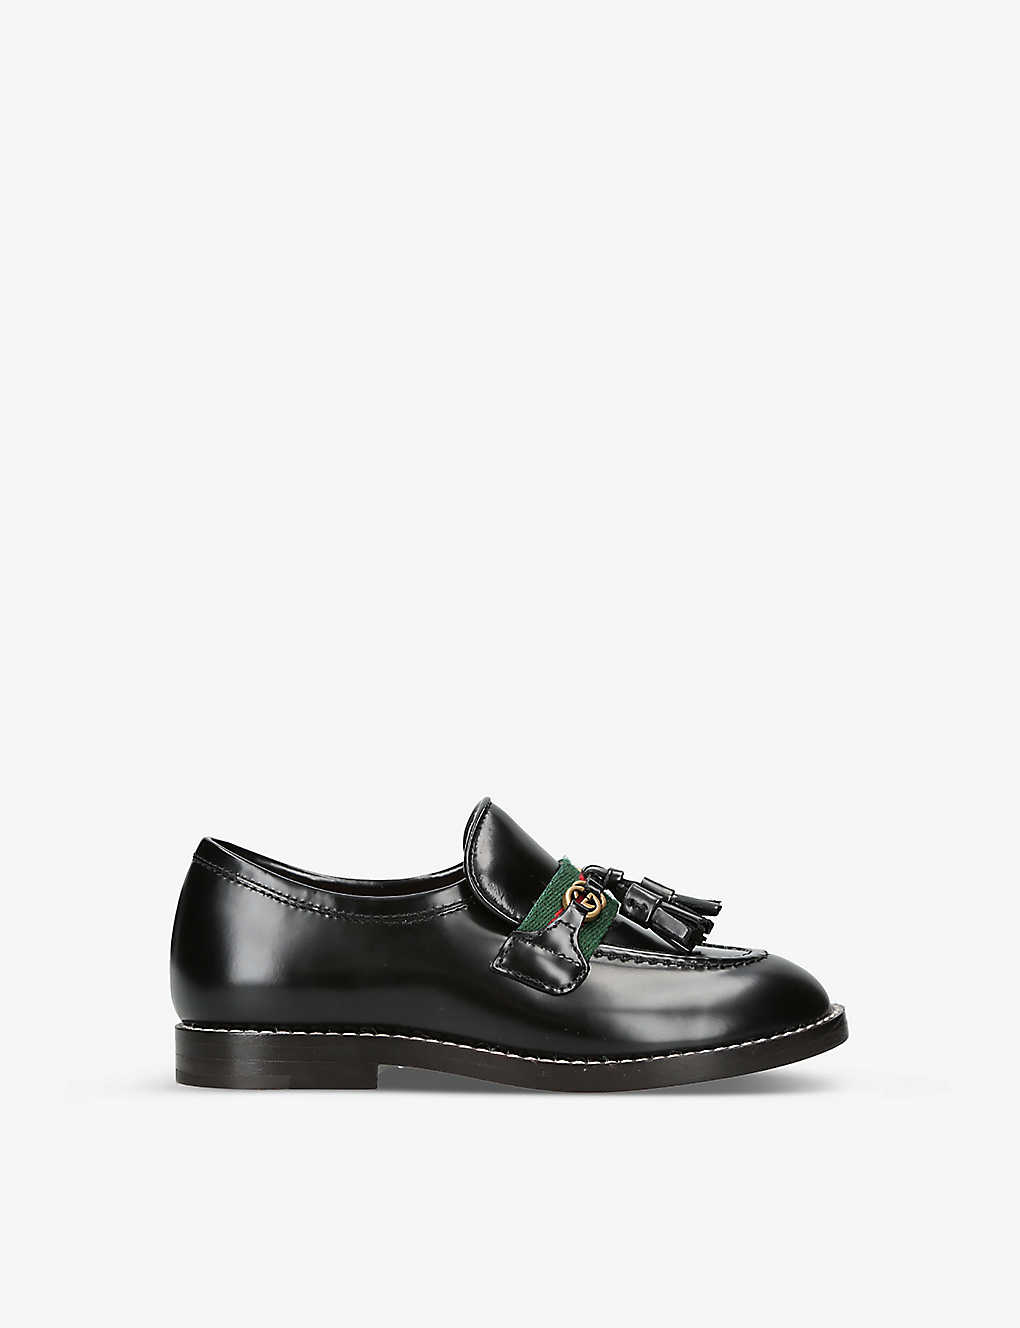 Gucci Boys Black Kids Faye Tasselled Leather Loafers 1-4 Years Old